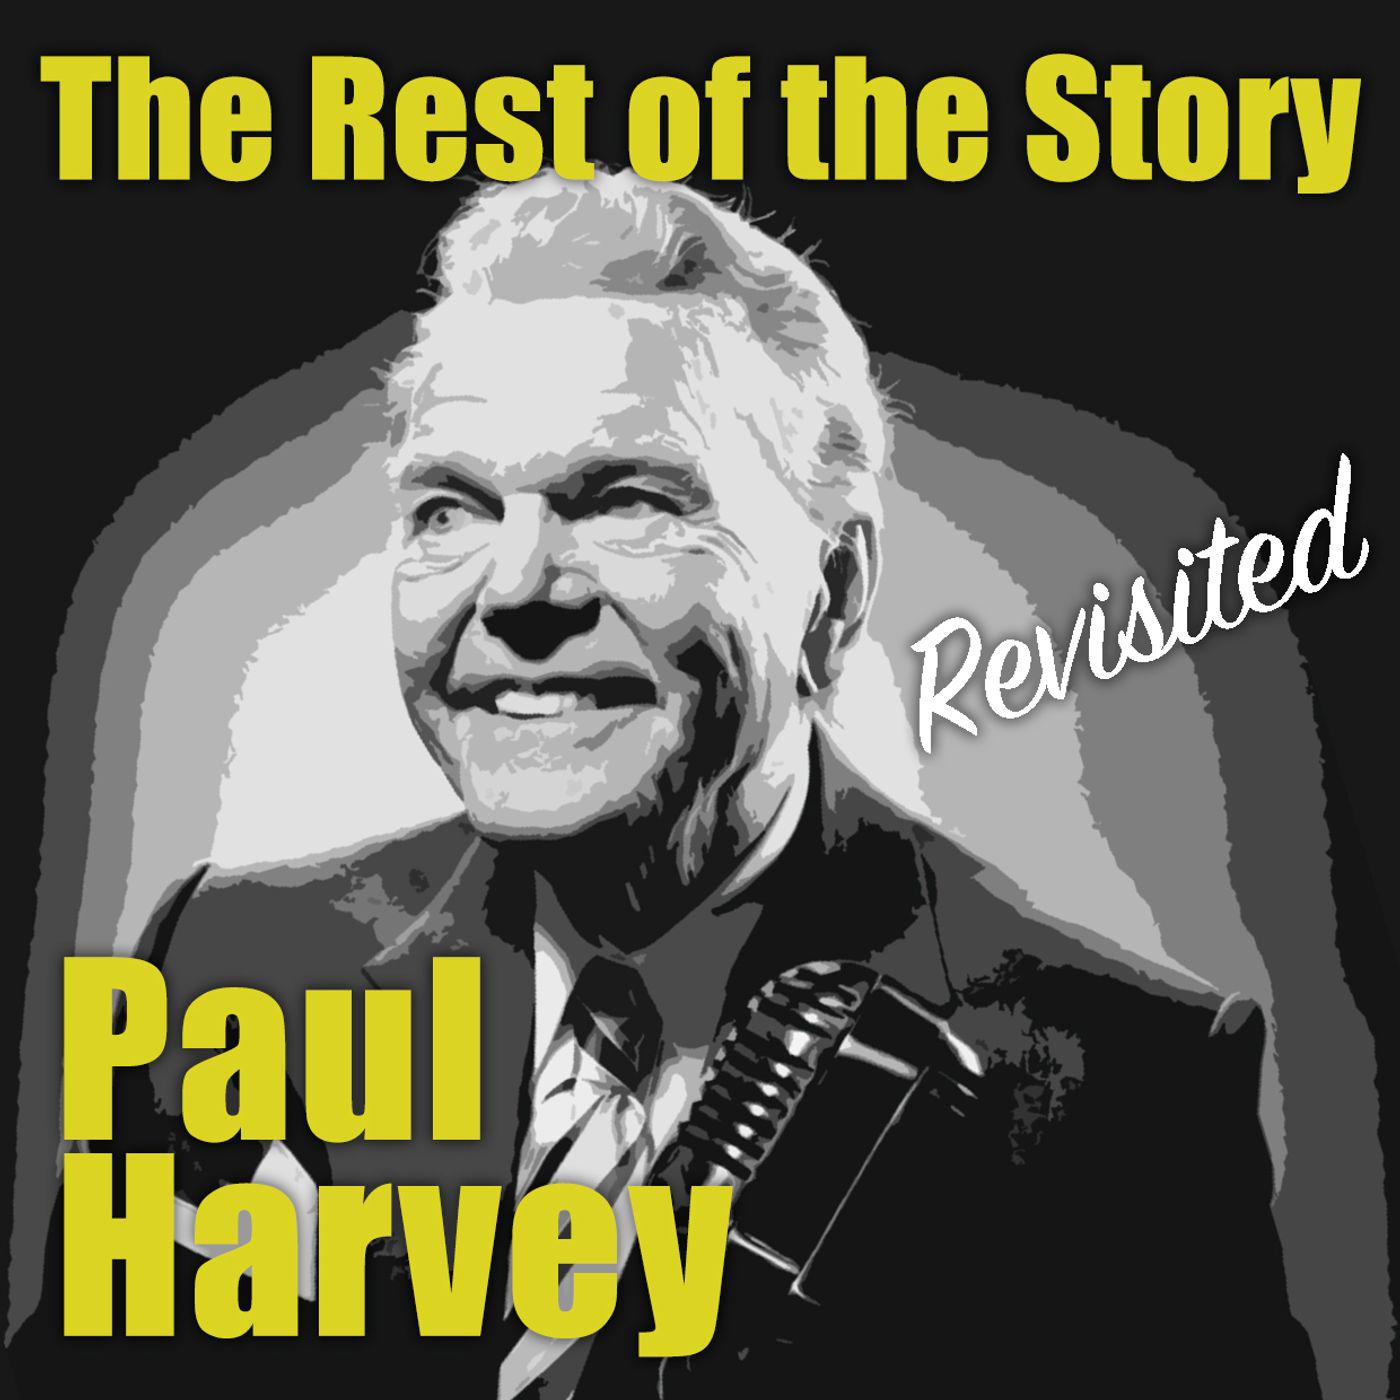 Paul Harvey Rest of the store image